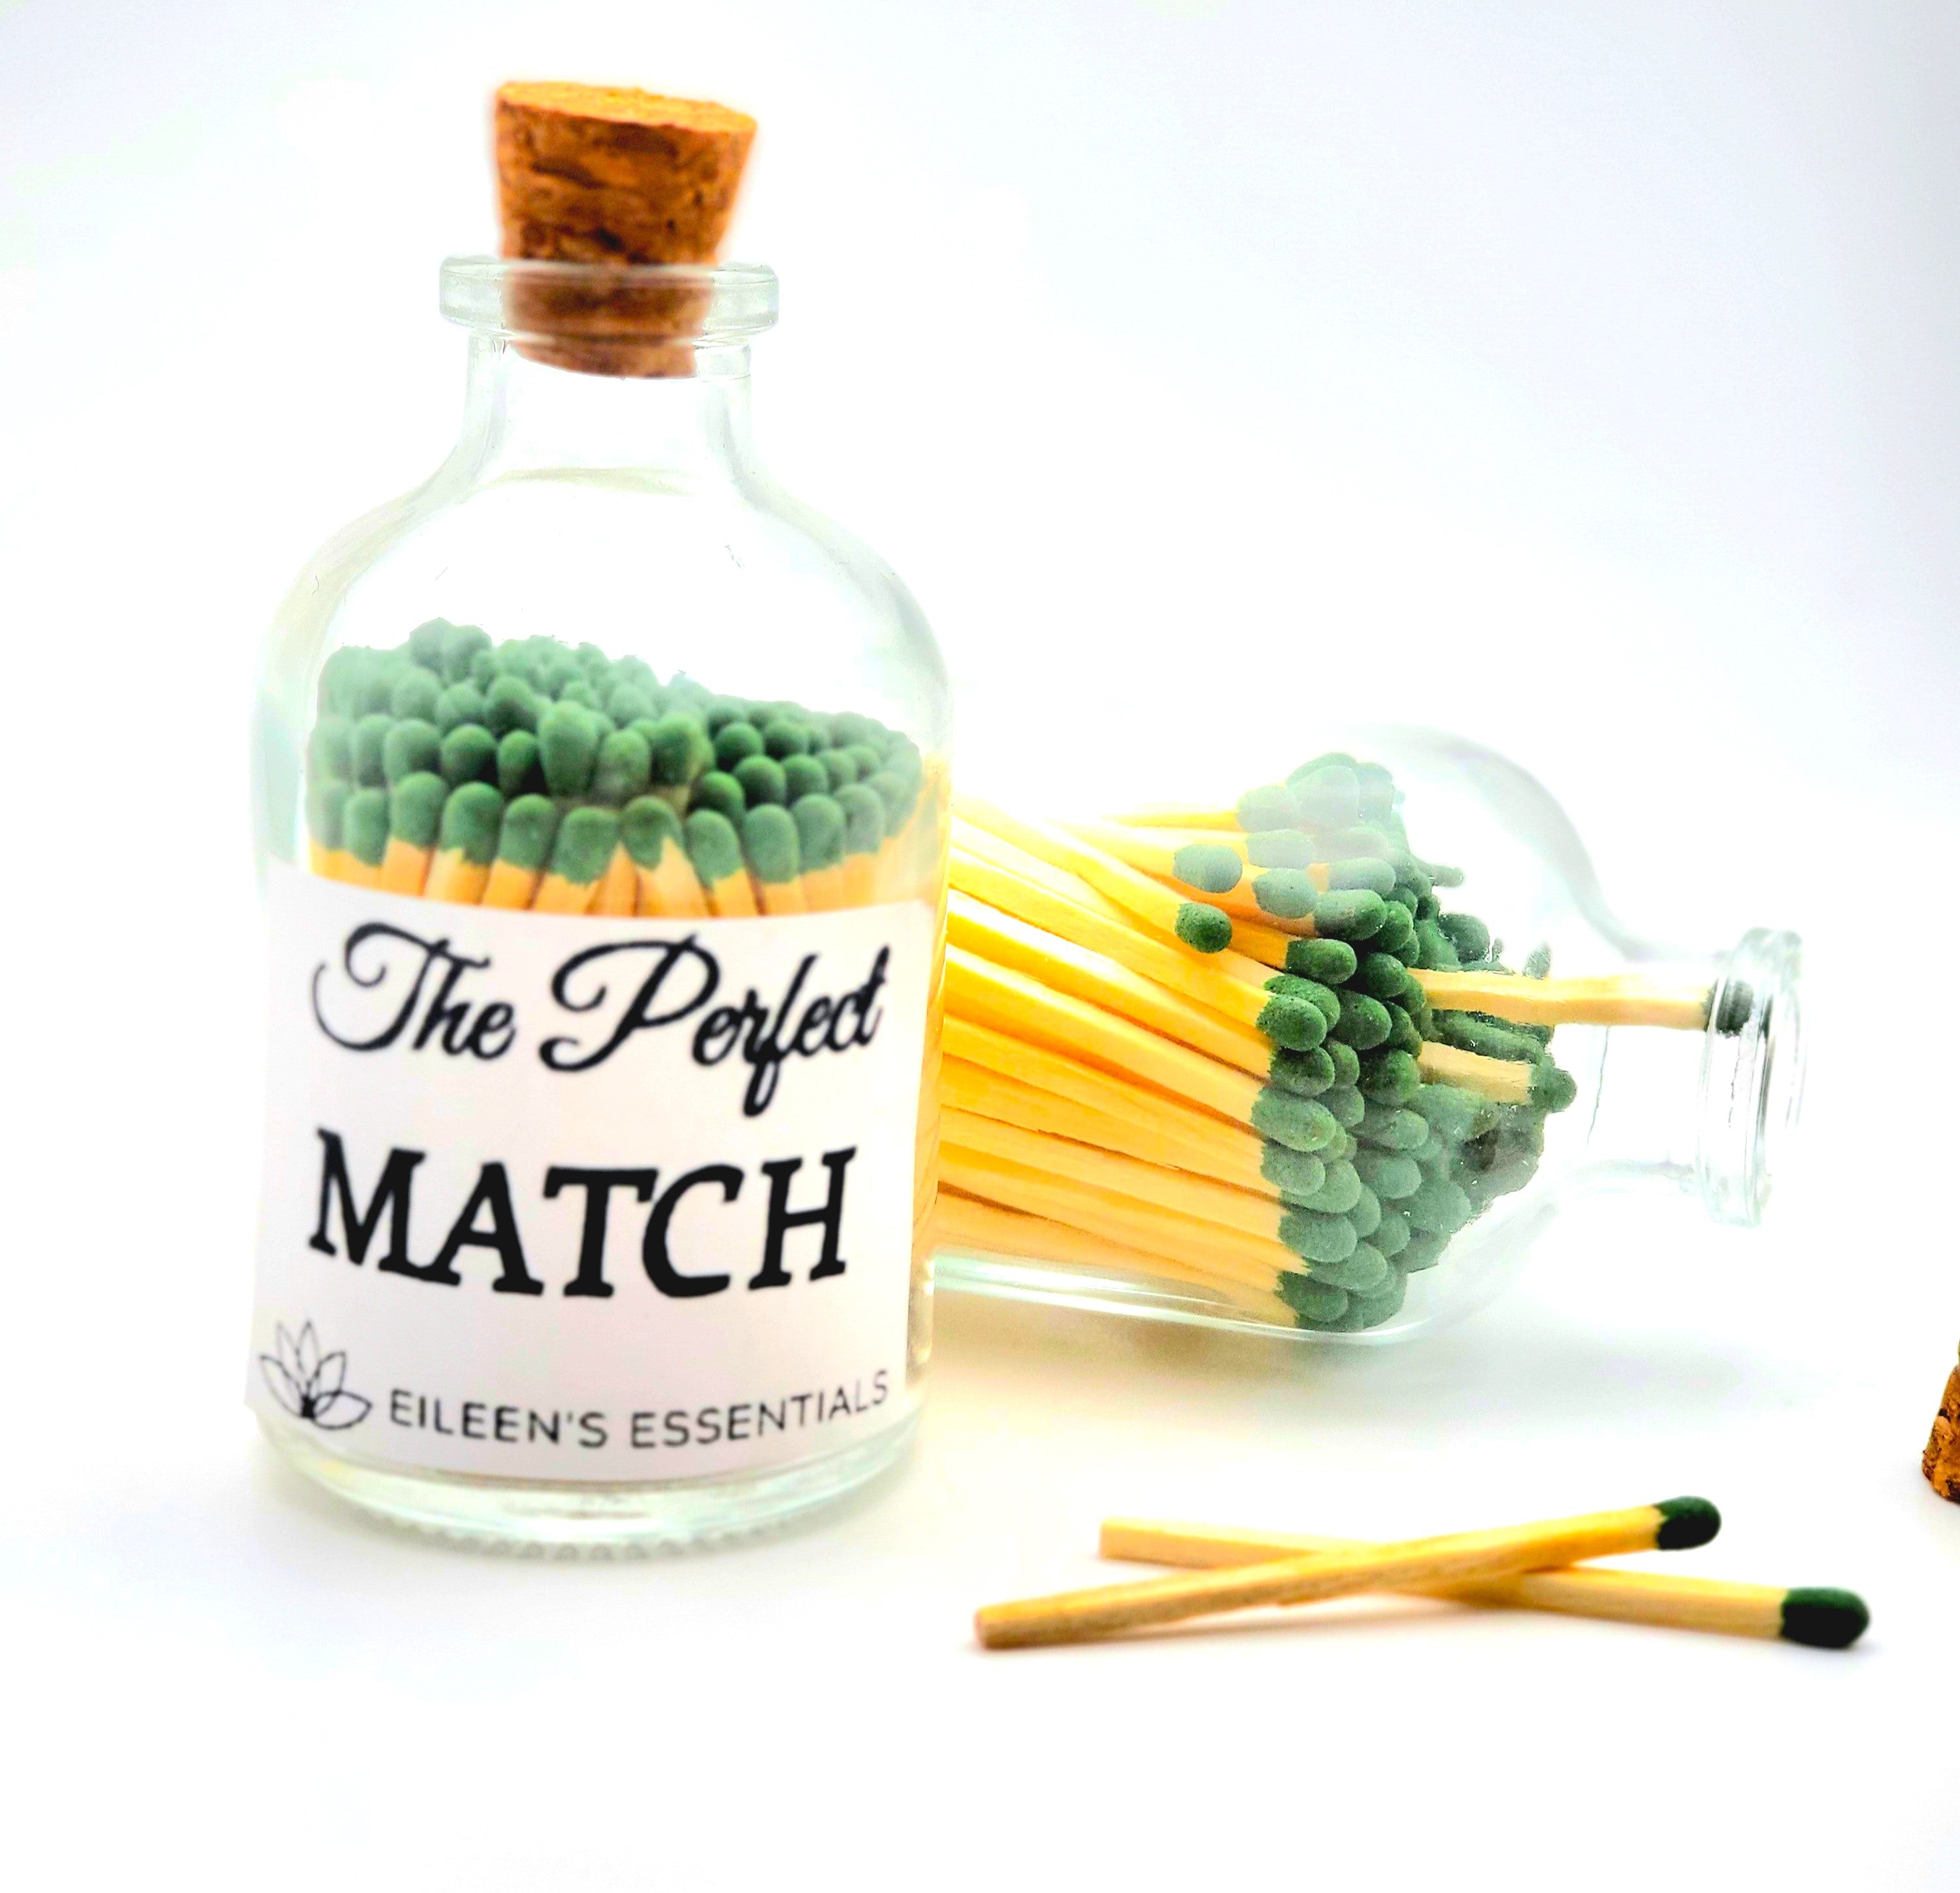 Party Favors; "The Perfect Match" Fancy Matches